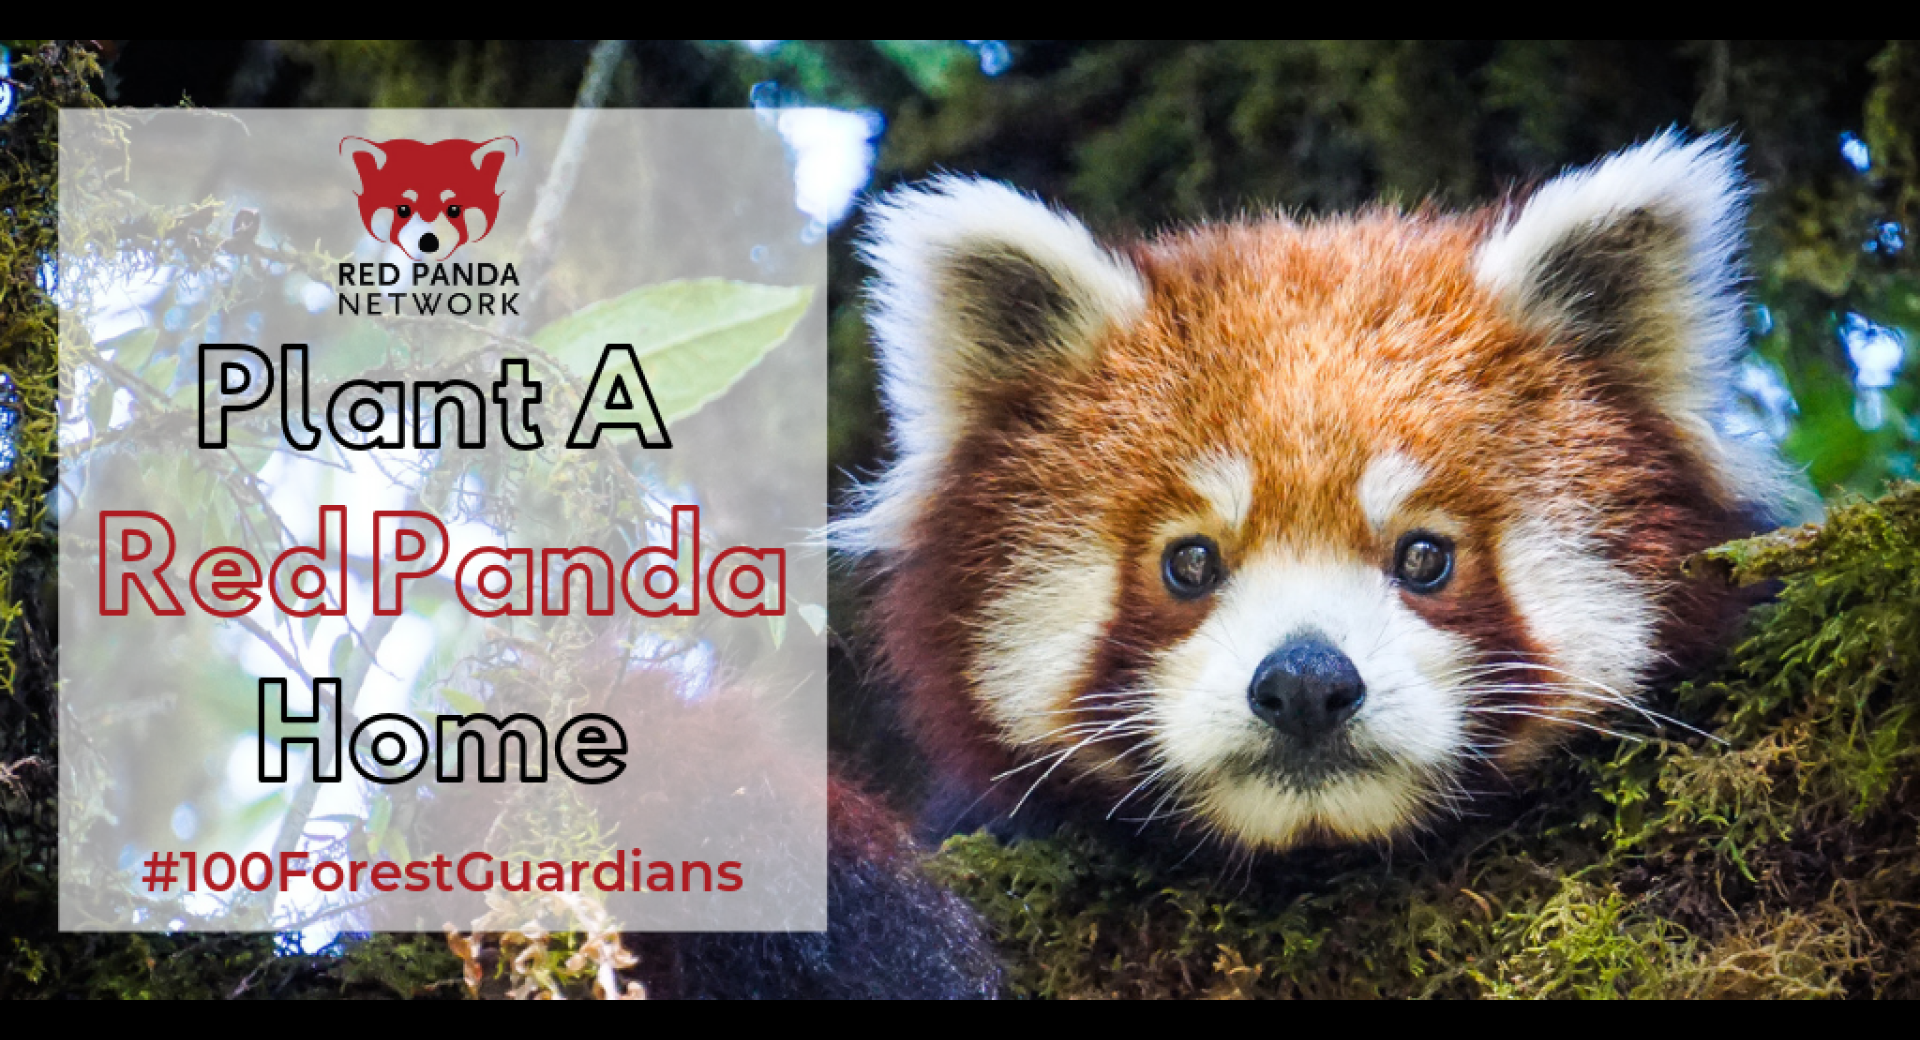 RPN celebrates 100 Forest Guardians by planting forests for red pandas!